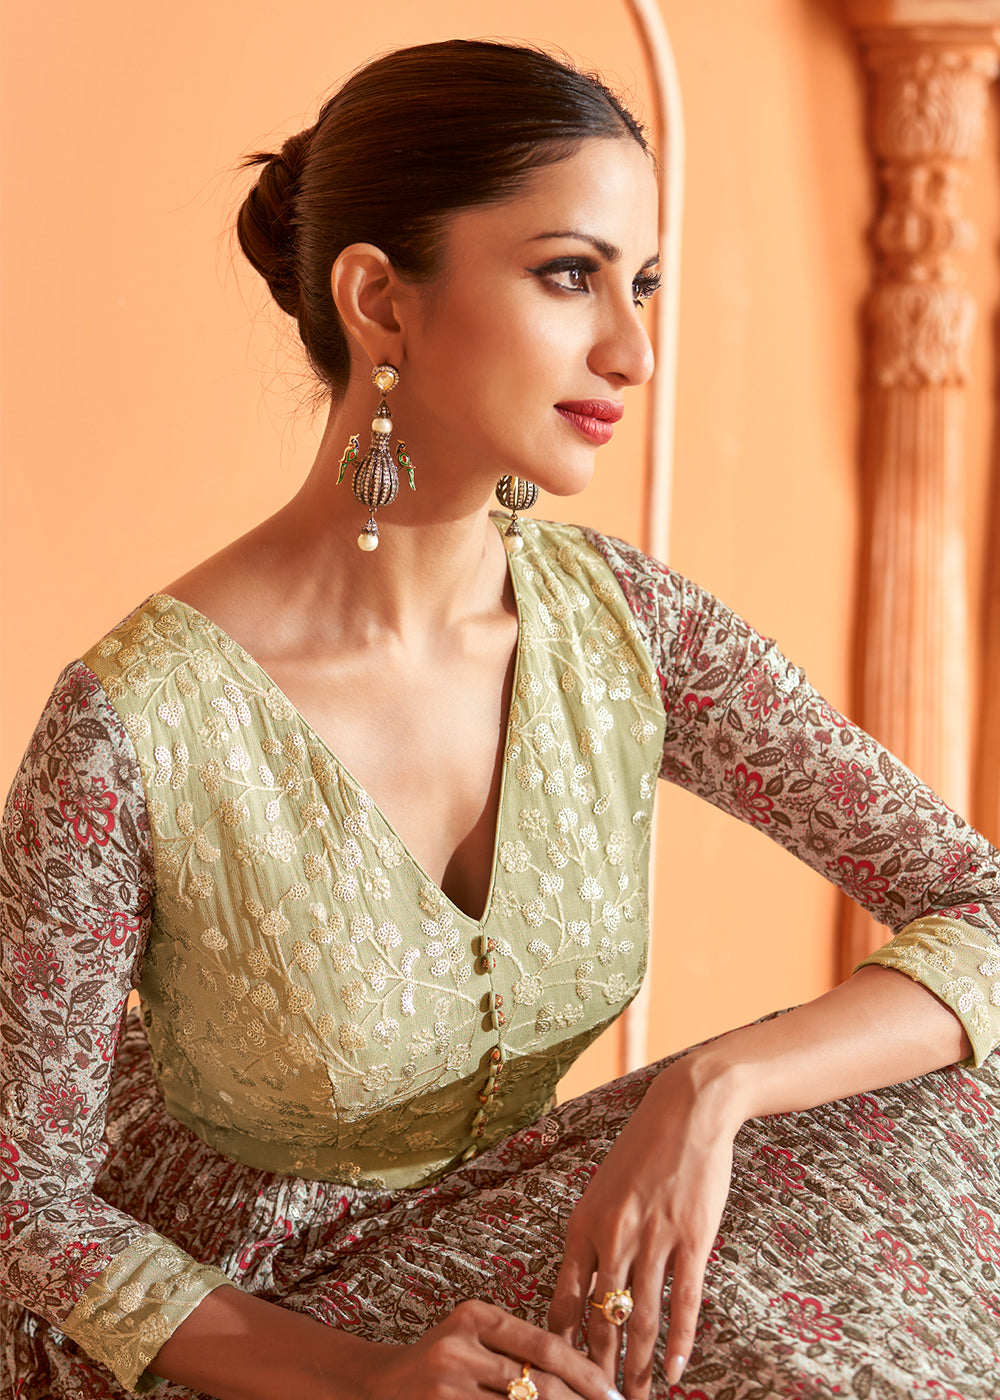 Buy Now Wedding Wear Floral Embroidered Light Green Anarkali Suit Online in USA, UK, Australia, New Zealand, Canada & Worldwide at Empress Clothing.